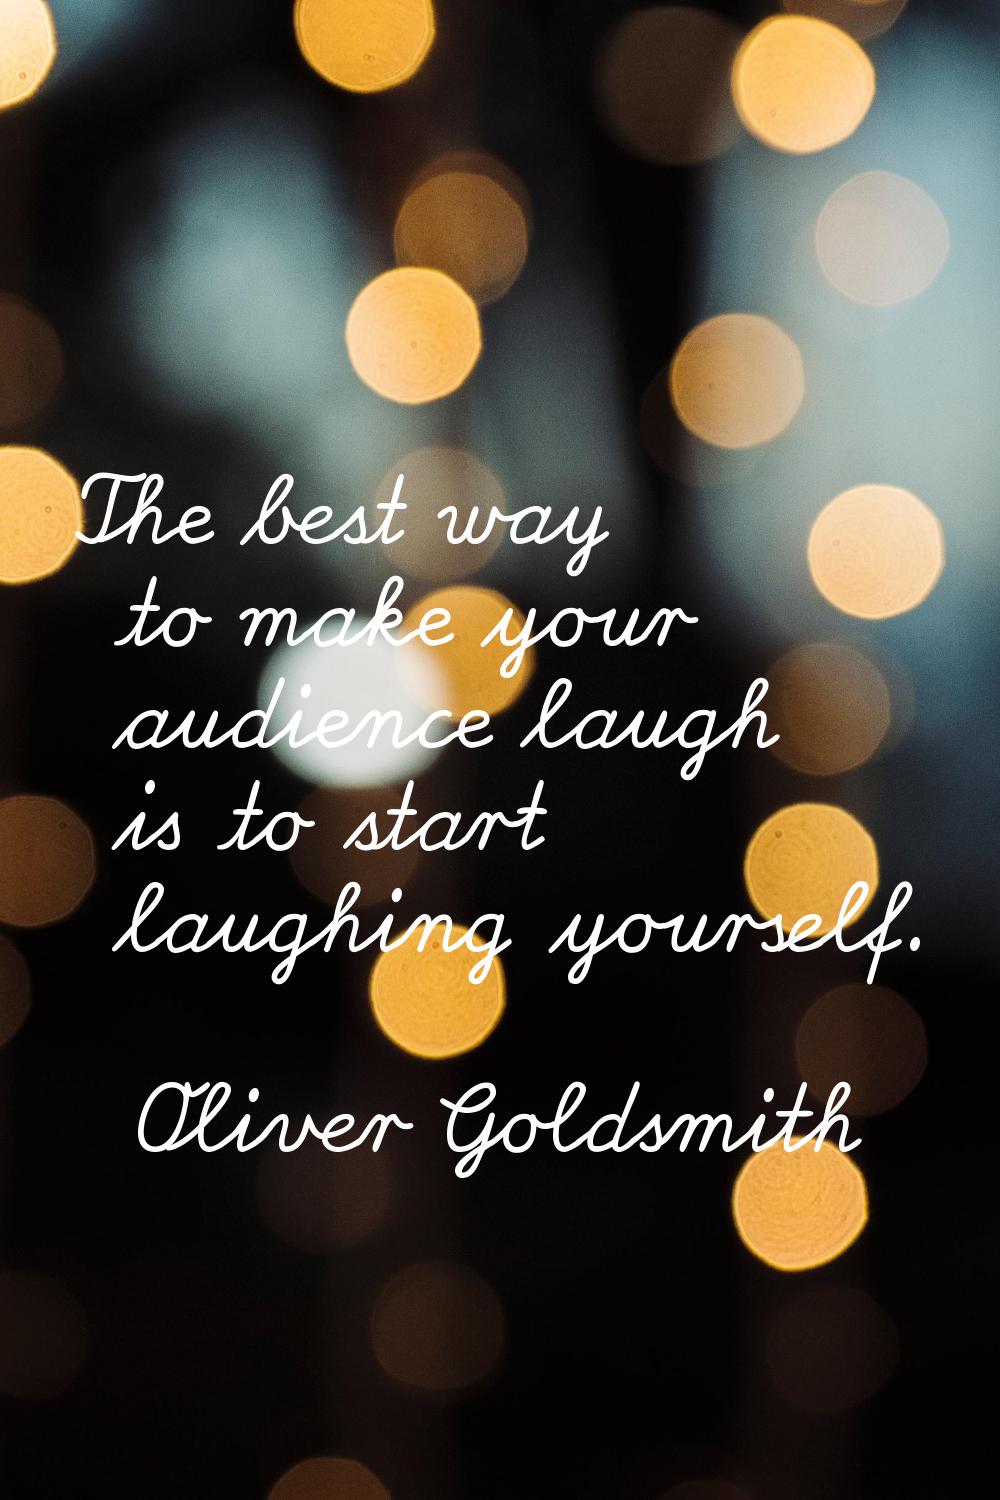 The best way to make your audience laugh is to start laughing yourself.